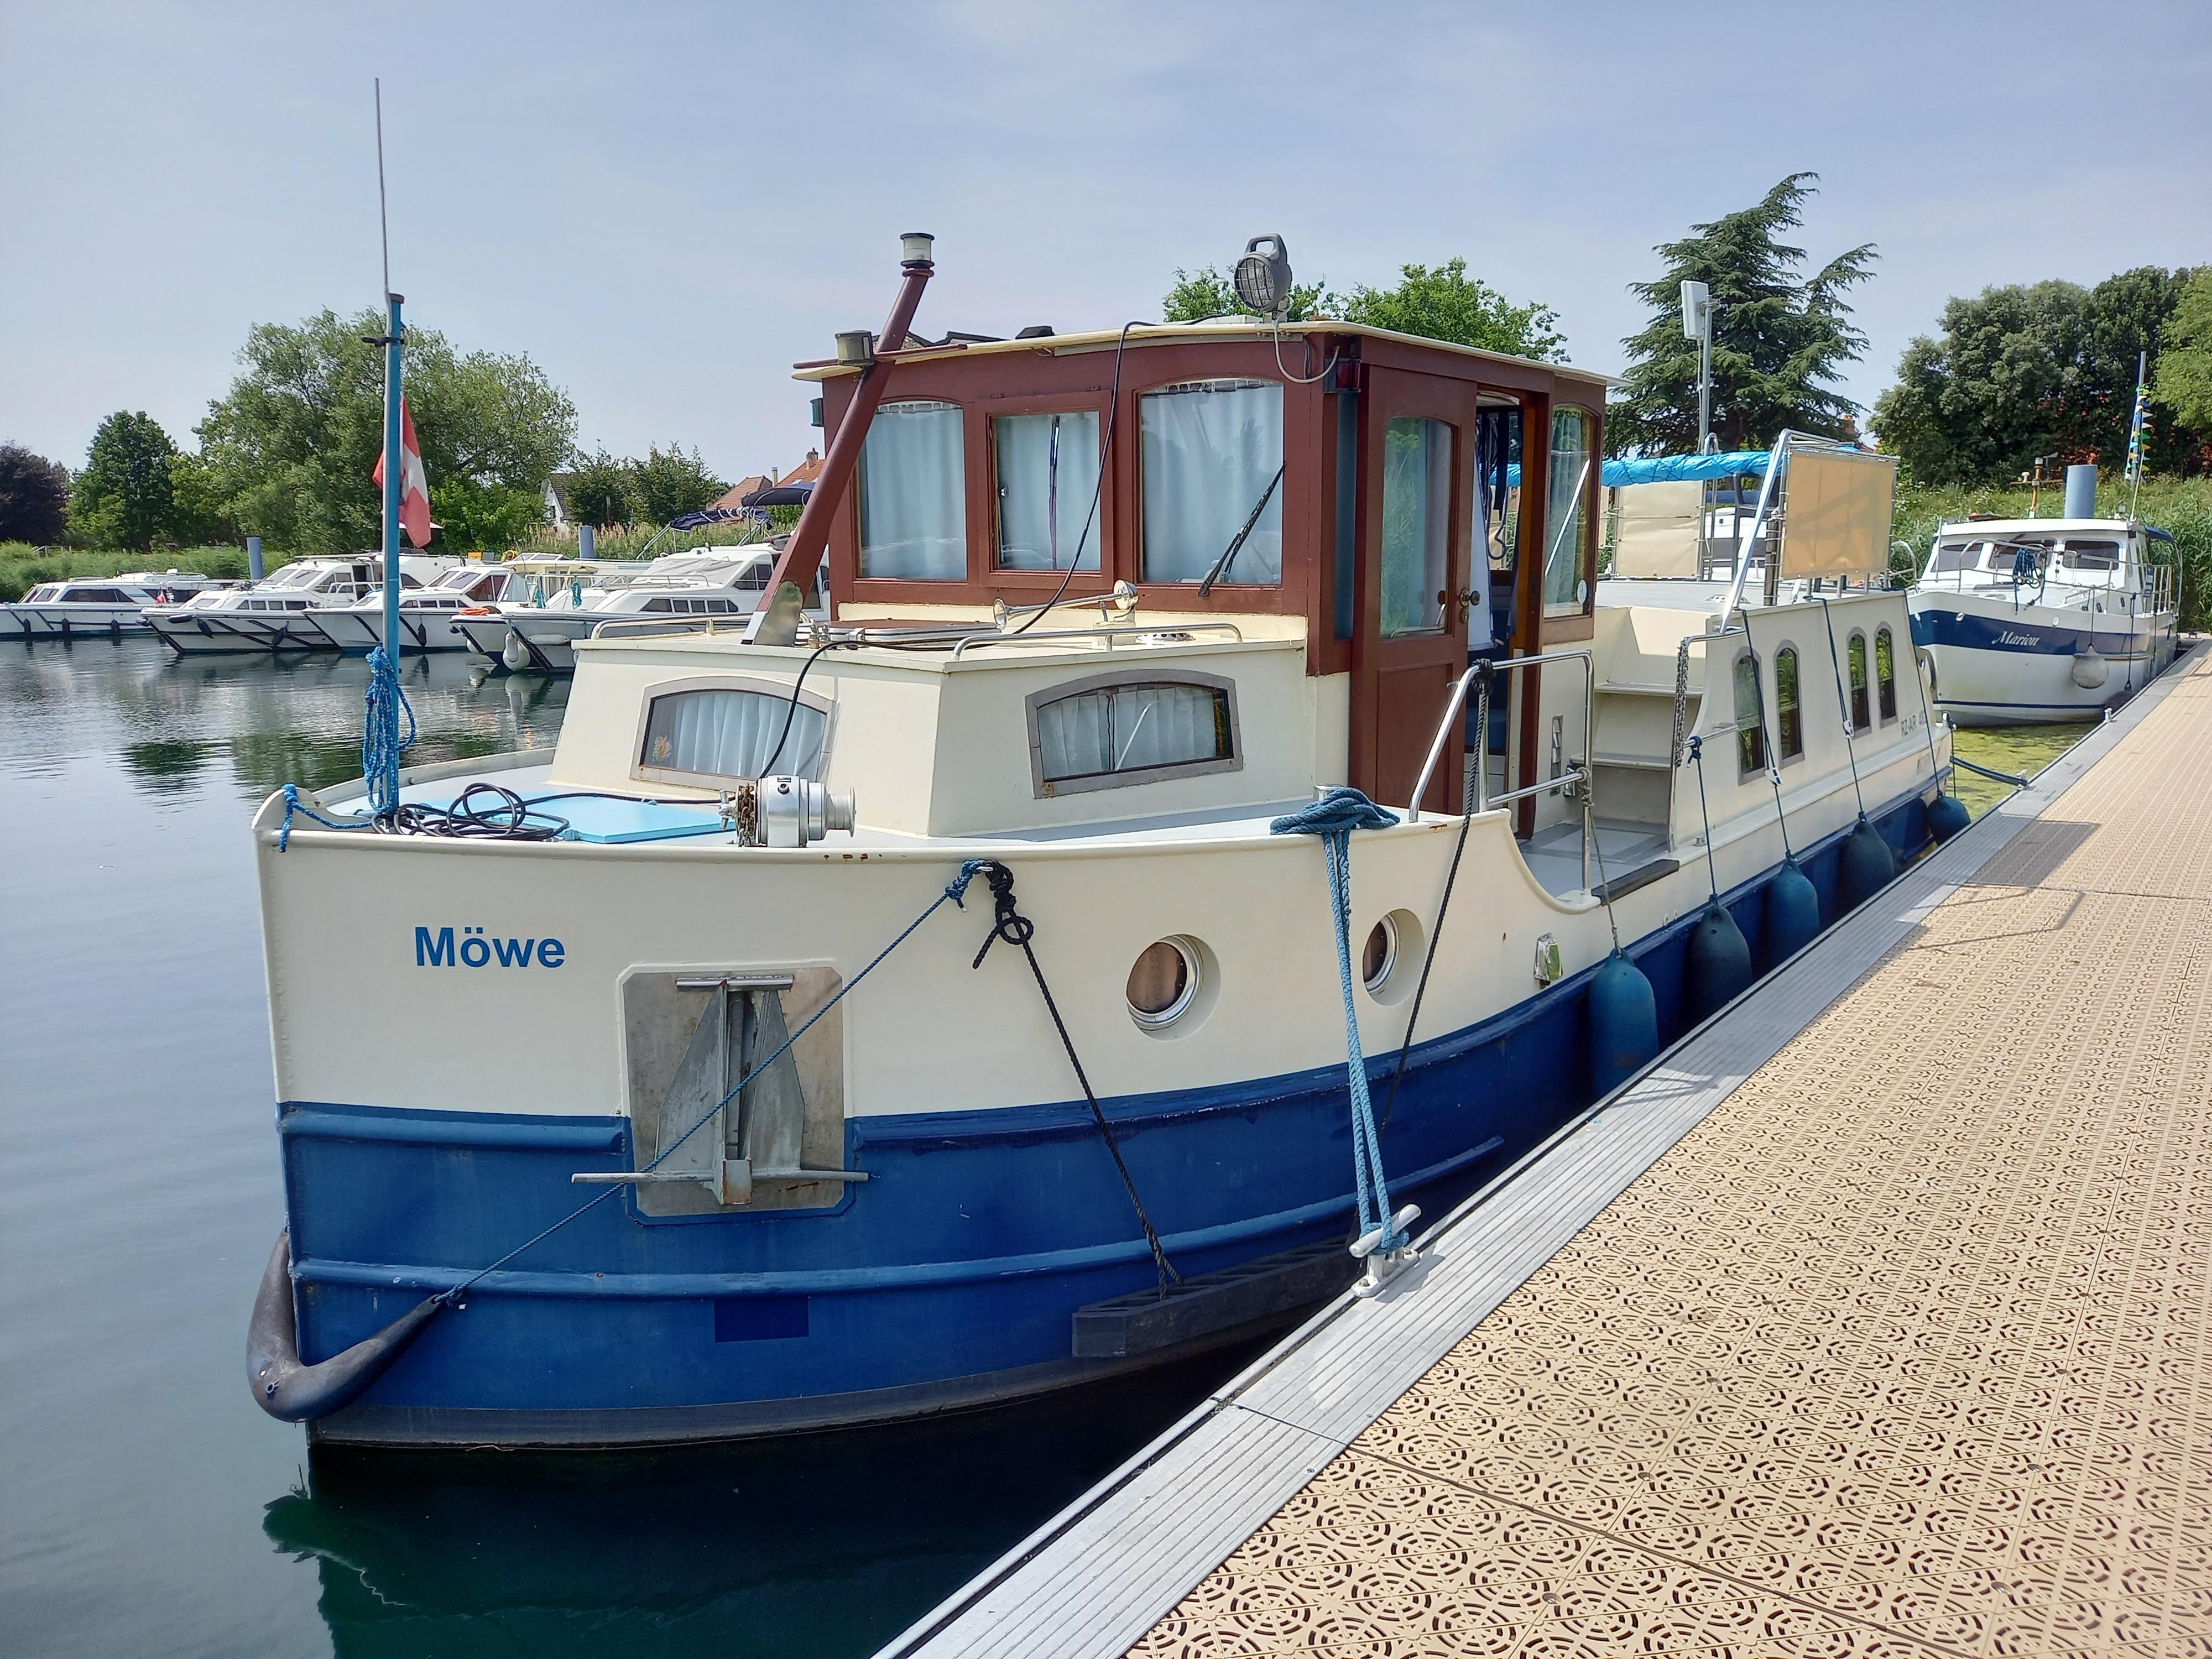 1993 Kuhnle Kormoran 940 Canal and River Cruiser for sale - YachtWorld